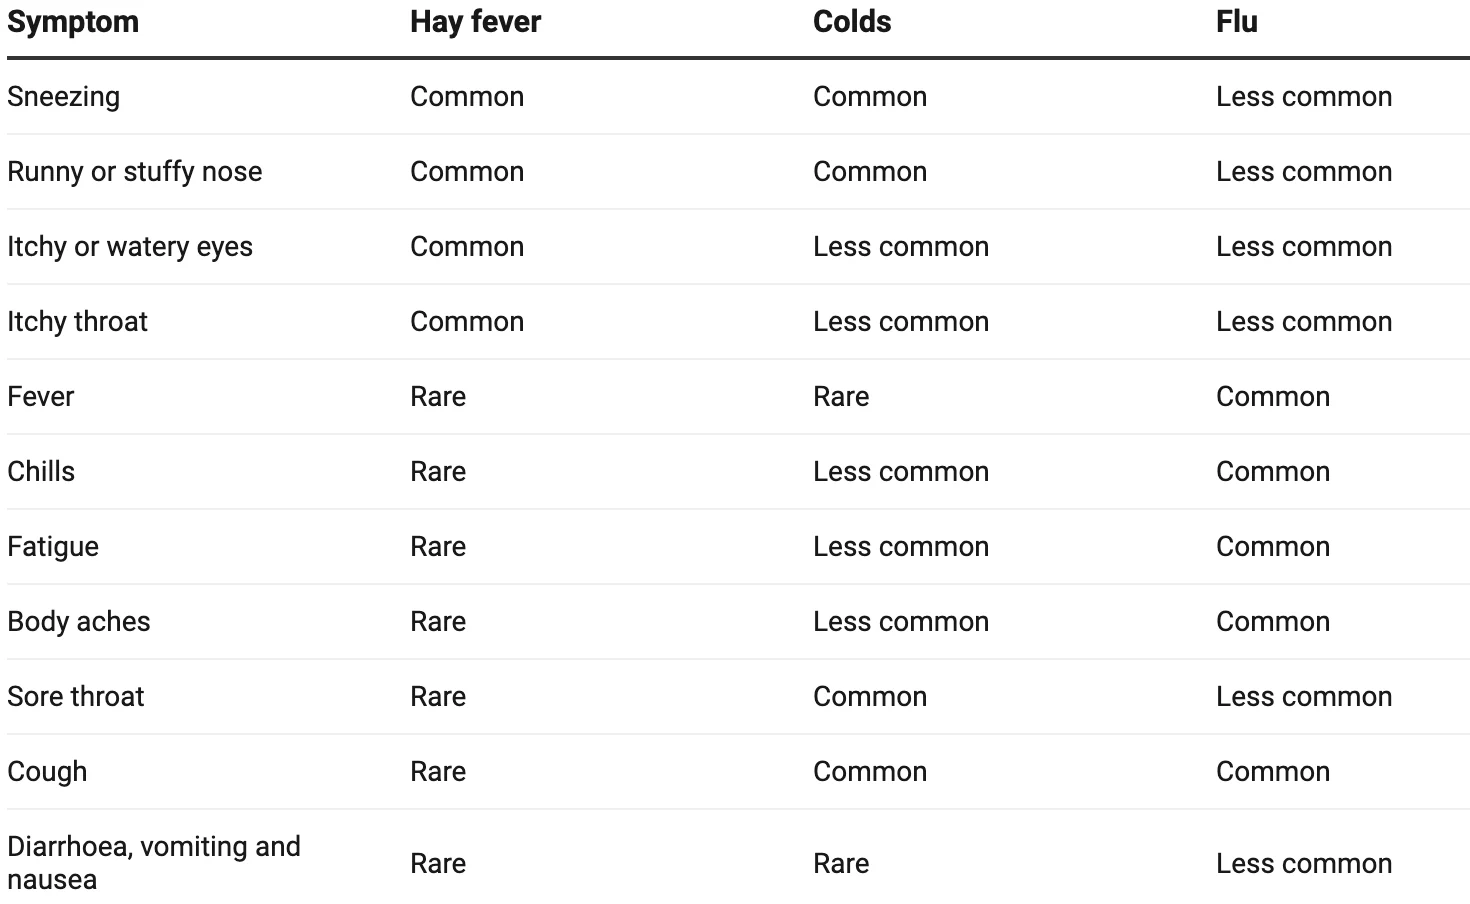 Conversation/Get the dataCreated with Datawrapper: Hay fever or cold